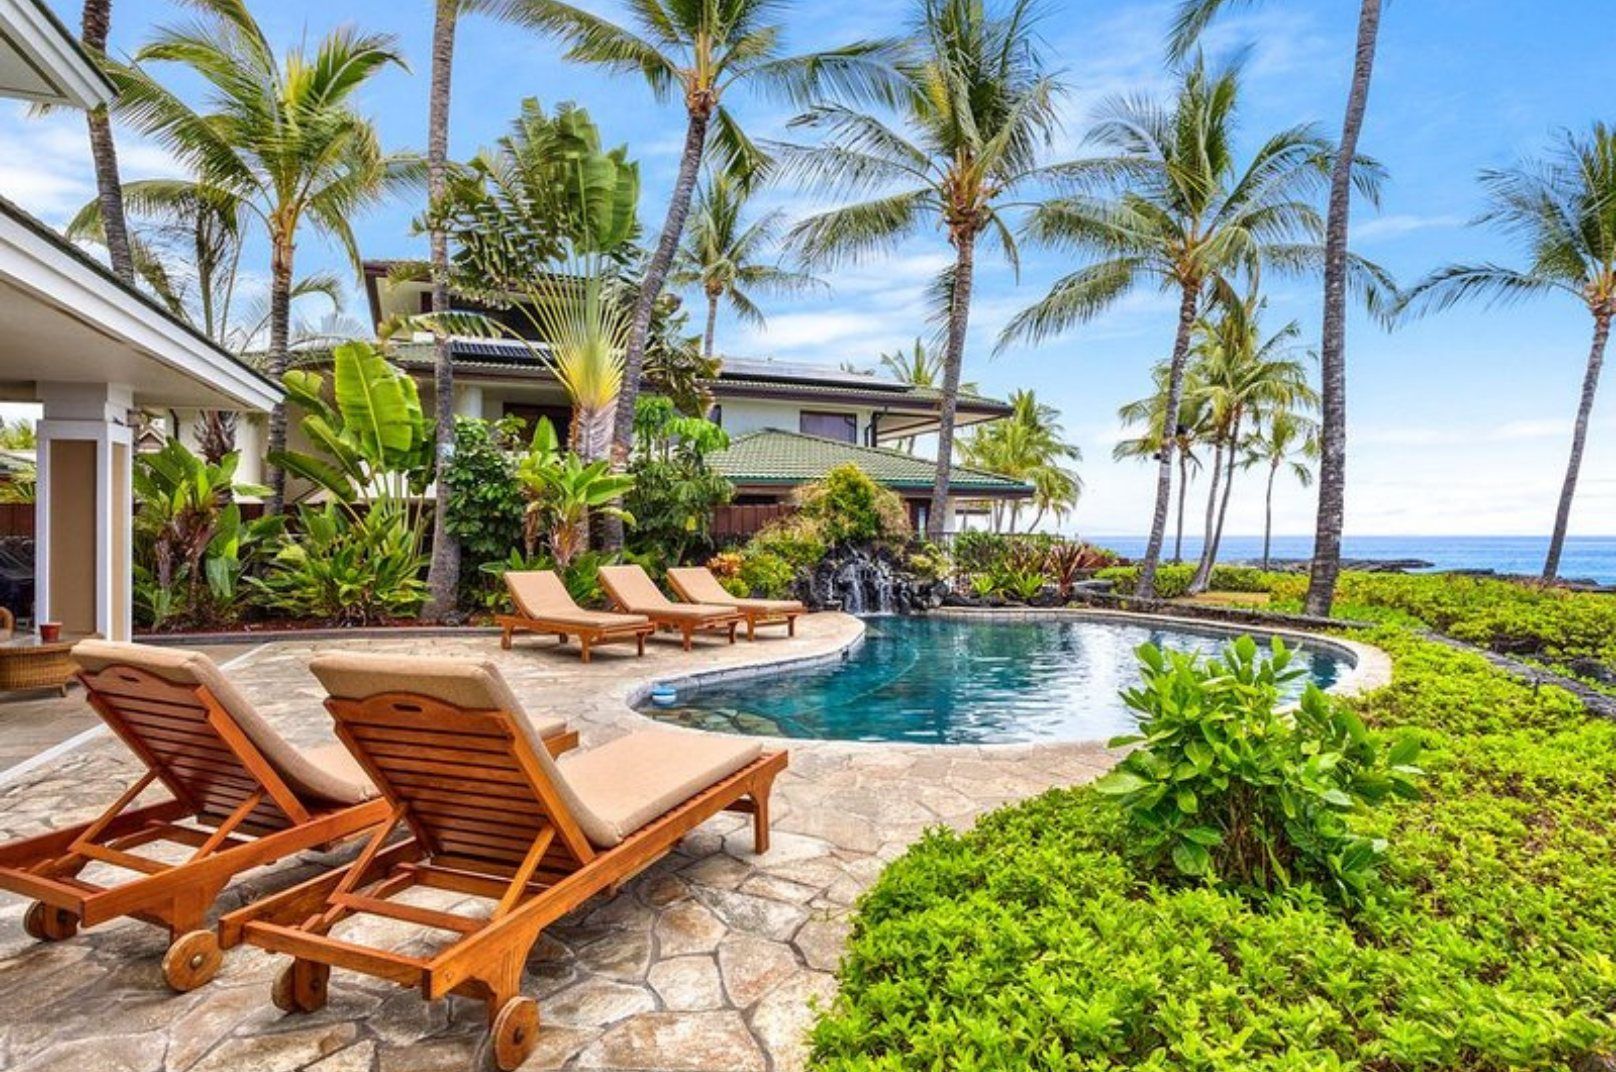 The Best Airbnbs on The Big Island of Hawaii